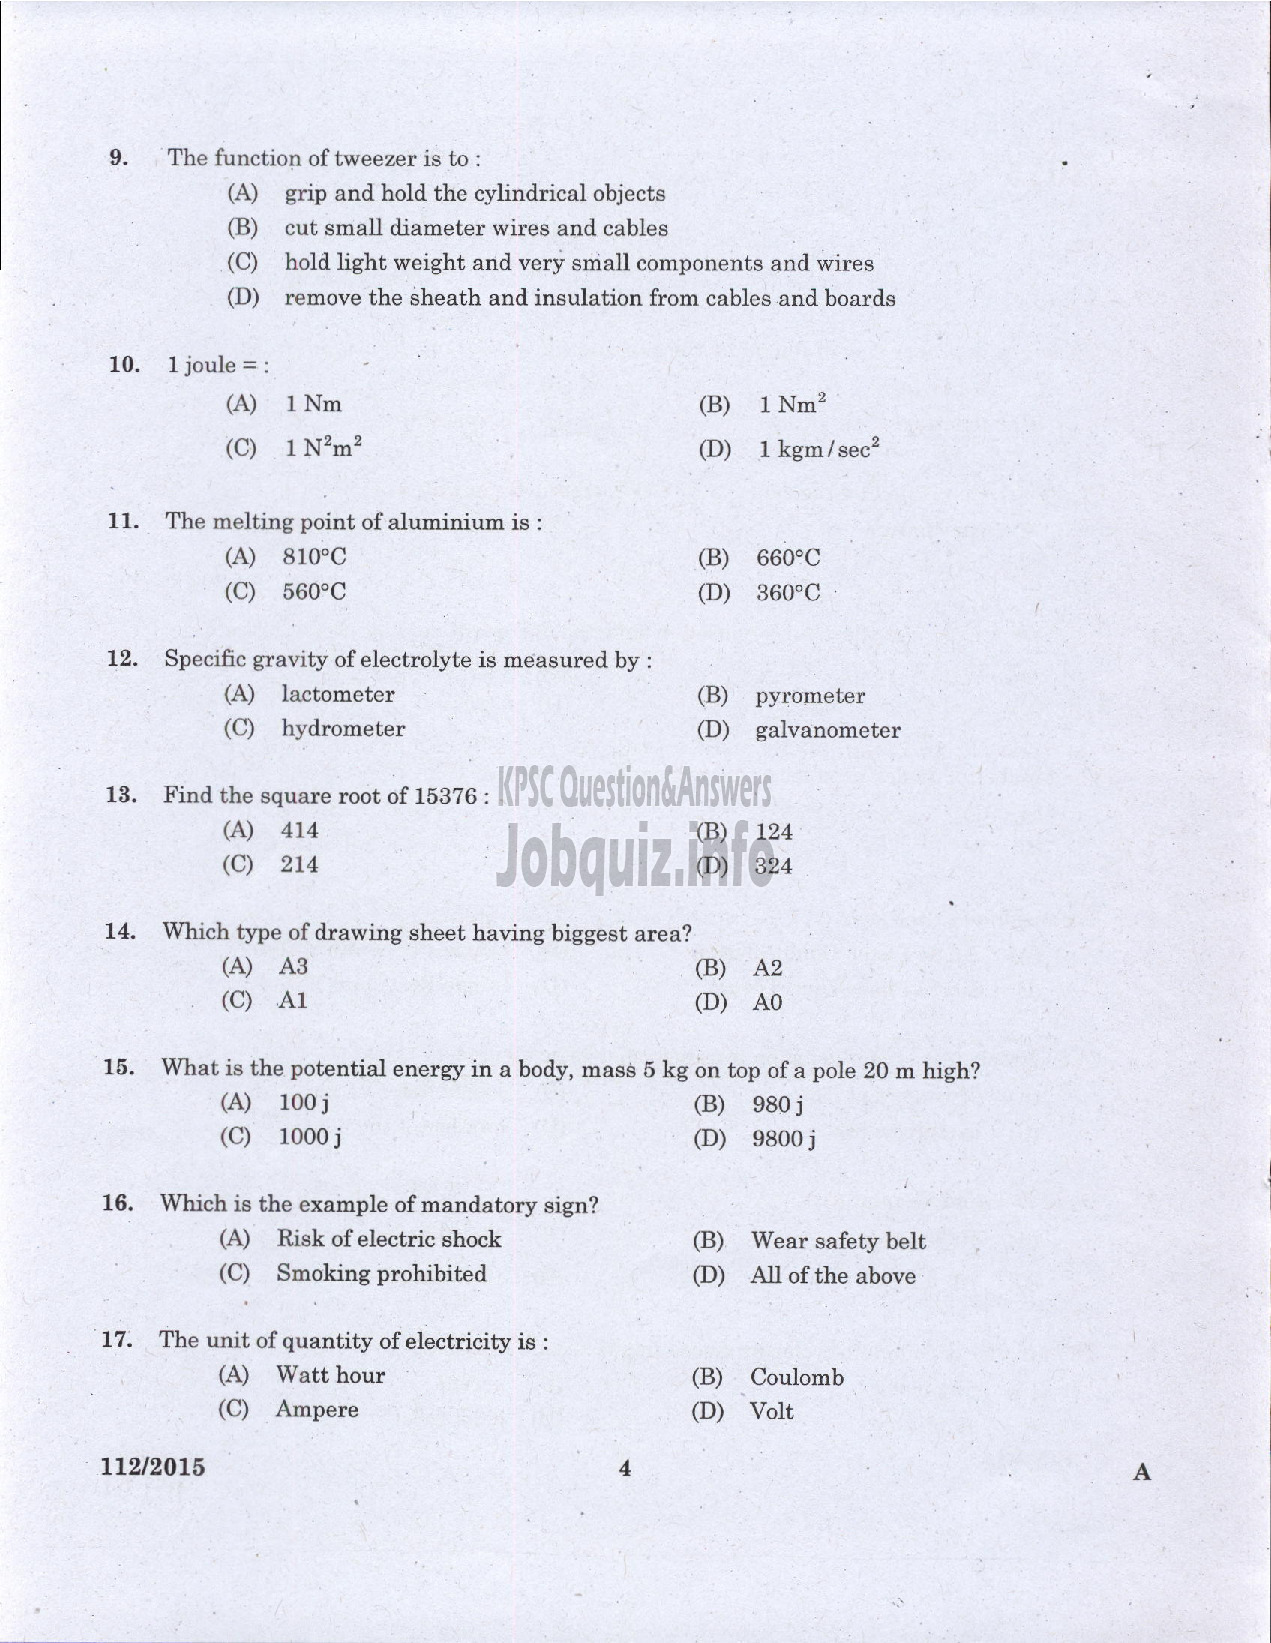 Kerala PSC Question Paper - TRADESMAN ELECTRICAL TECHNICAL EDUCATION/ELECTRICIAN GROUND WATER /ELECTRICIAN GR II PRINTING GOVT PRESSES ELECTRICIAN AGRICULTURE /ELECTRICIAN GR II THE KERALA CERAMICS LTD-2